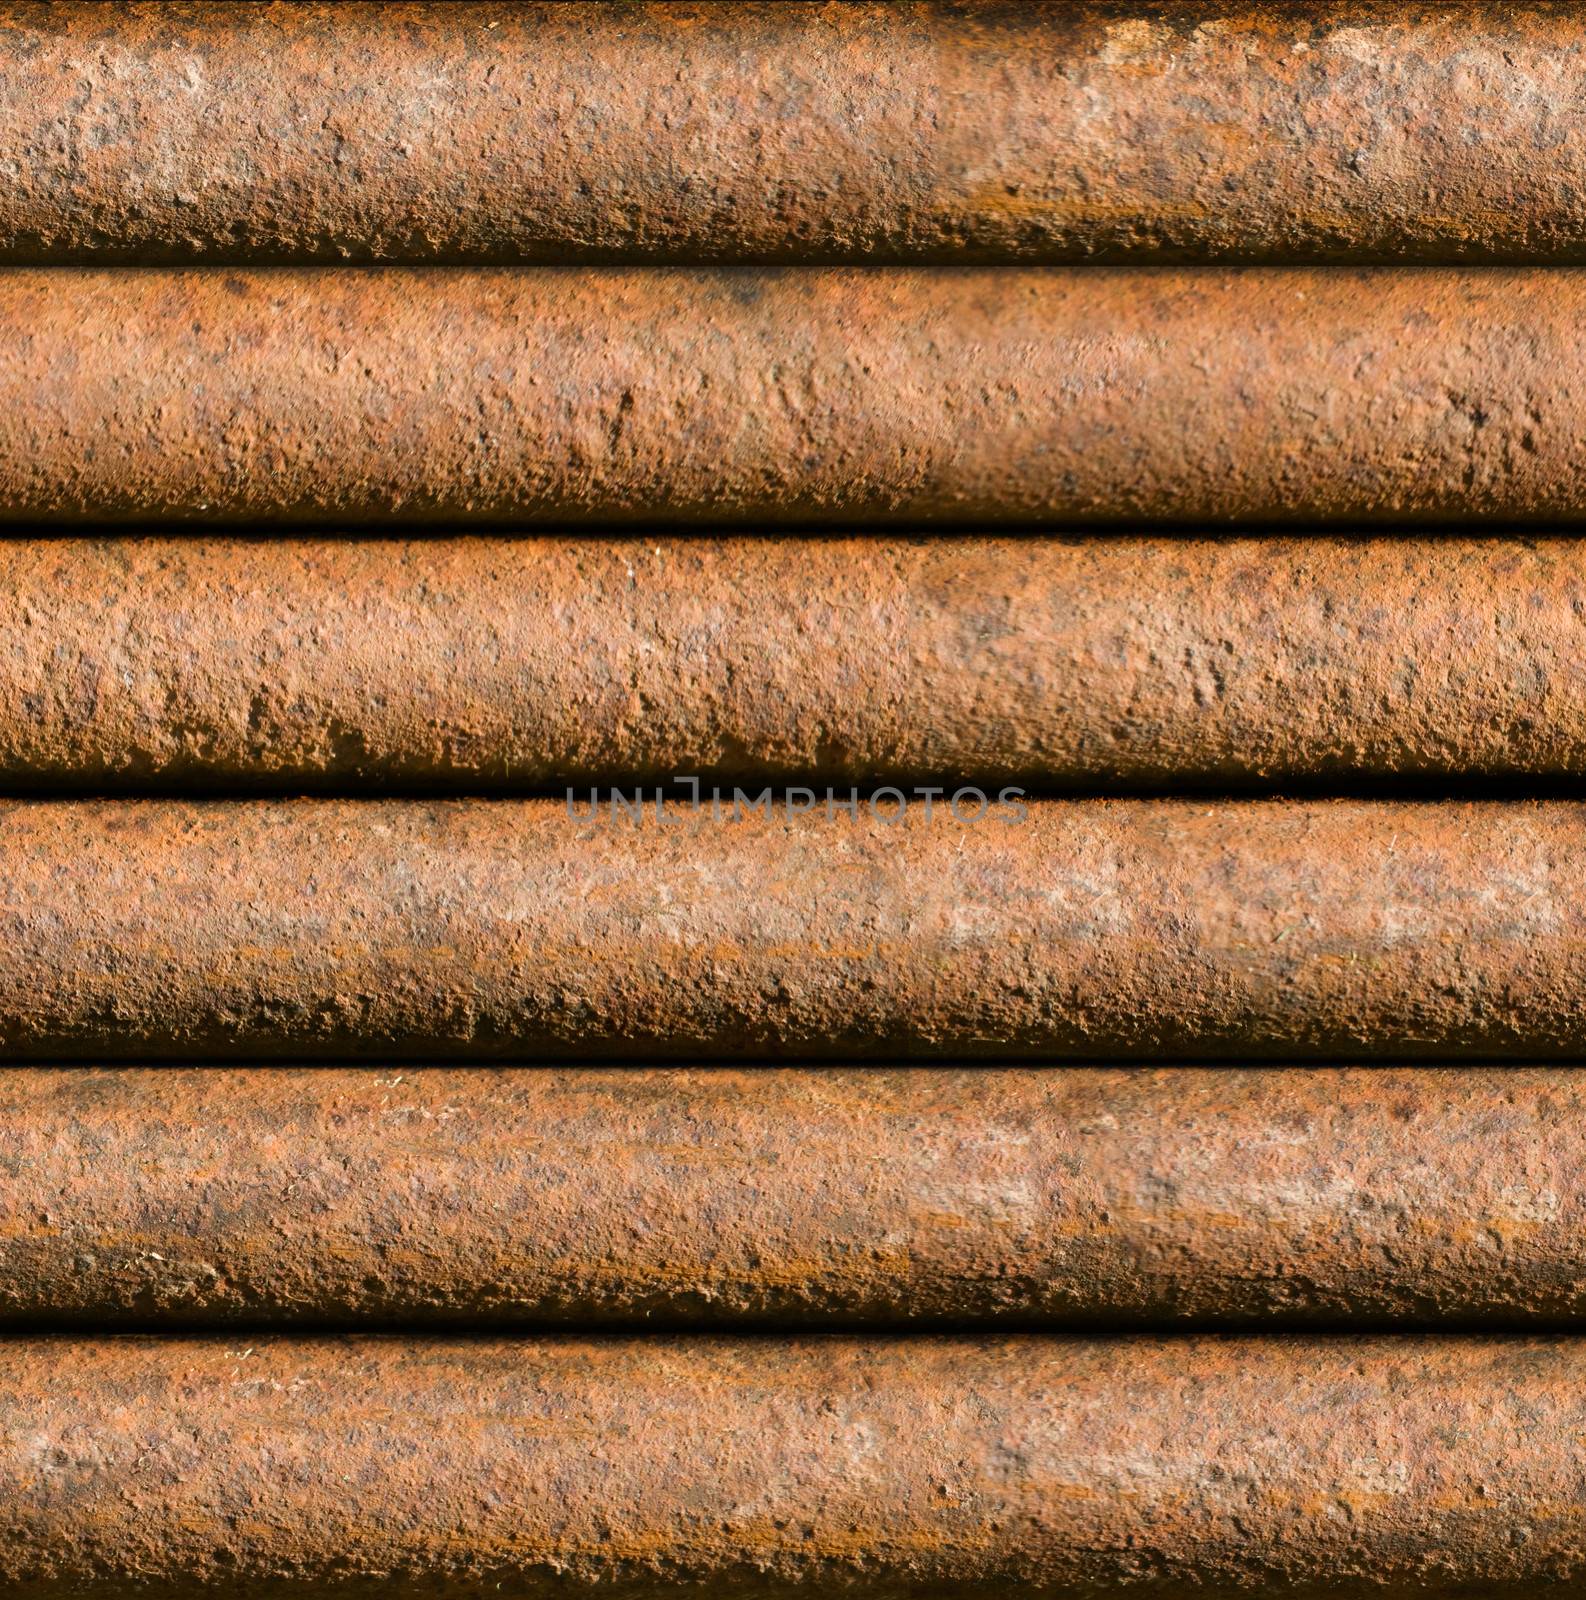 Horizontal rusty pipe background seamlessly tileable by Balefire9